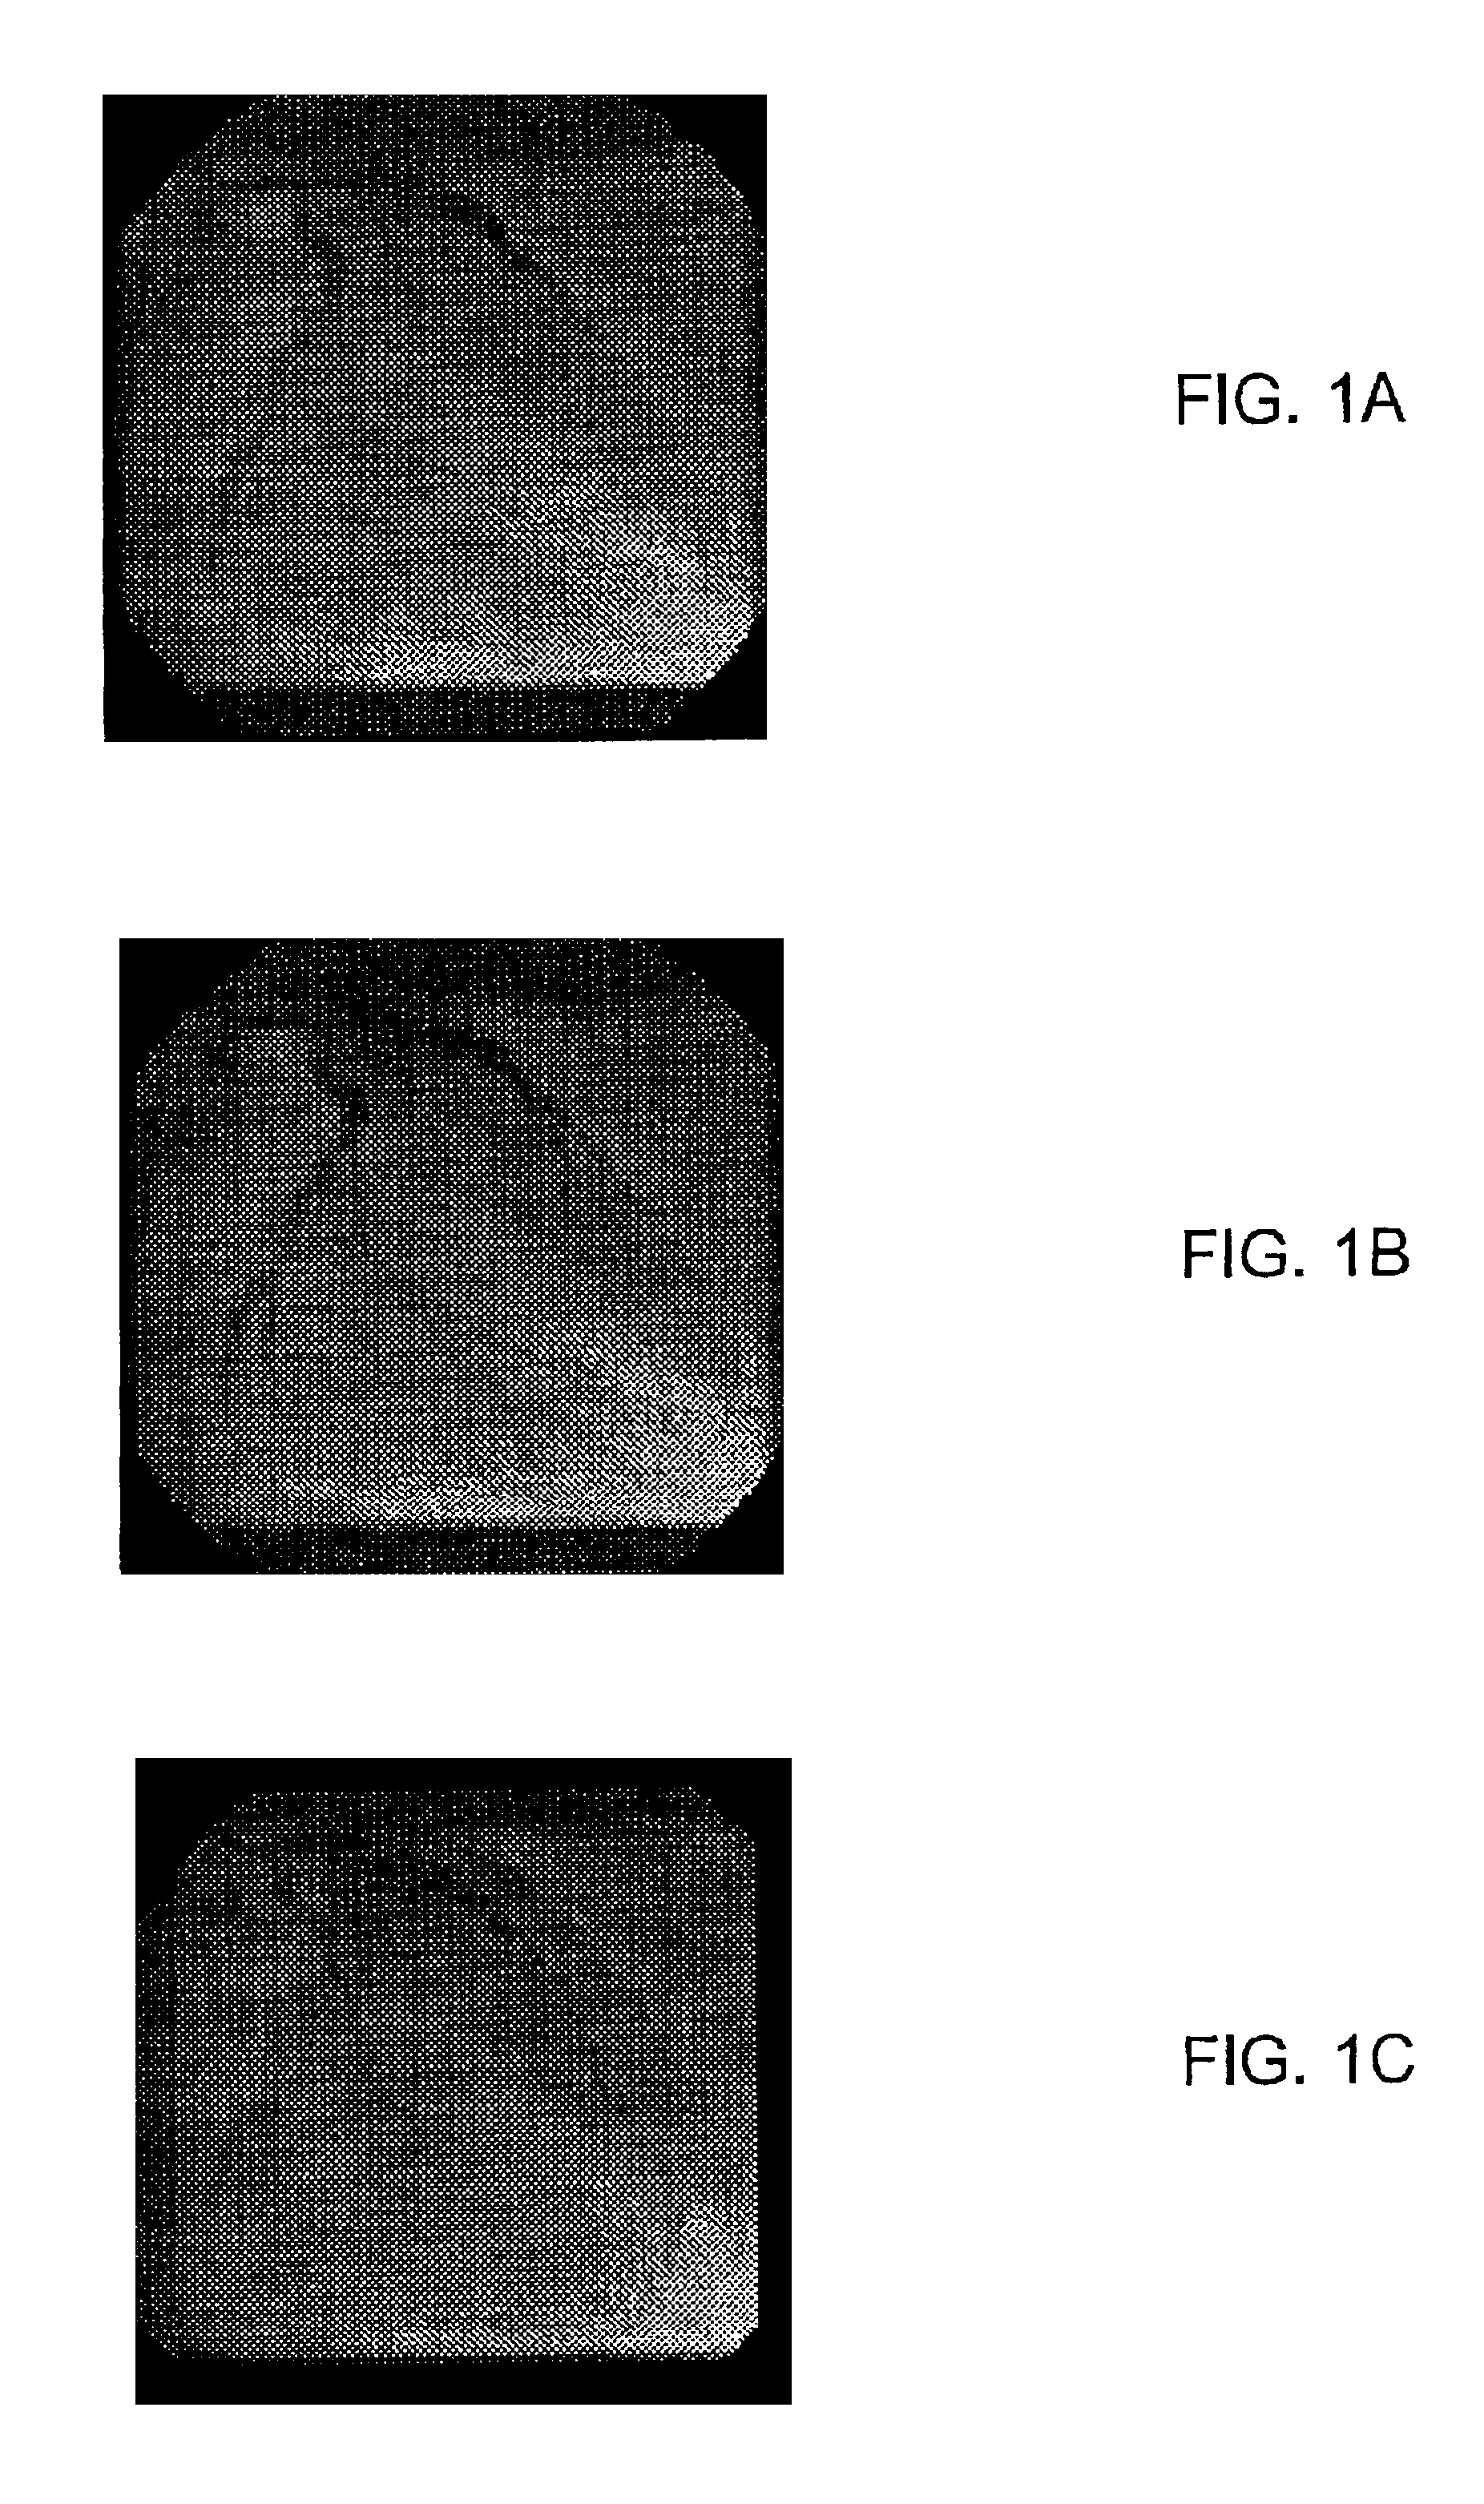 Method for processing images of coronary arteries